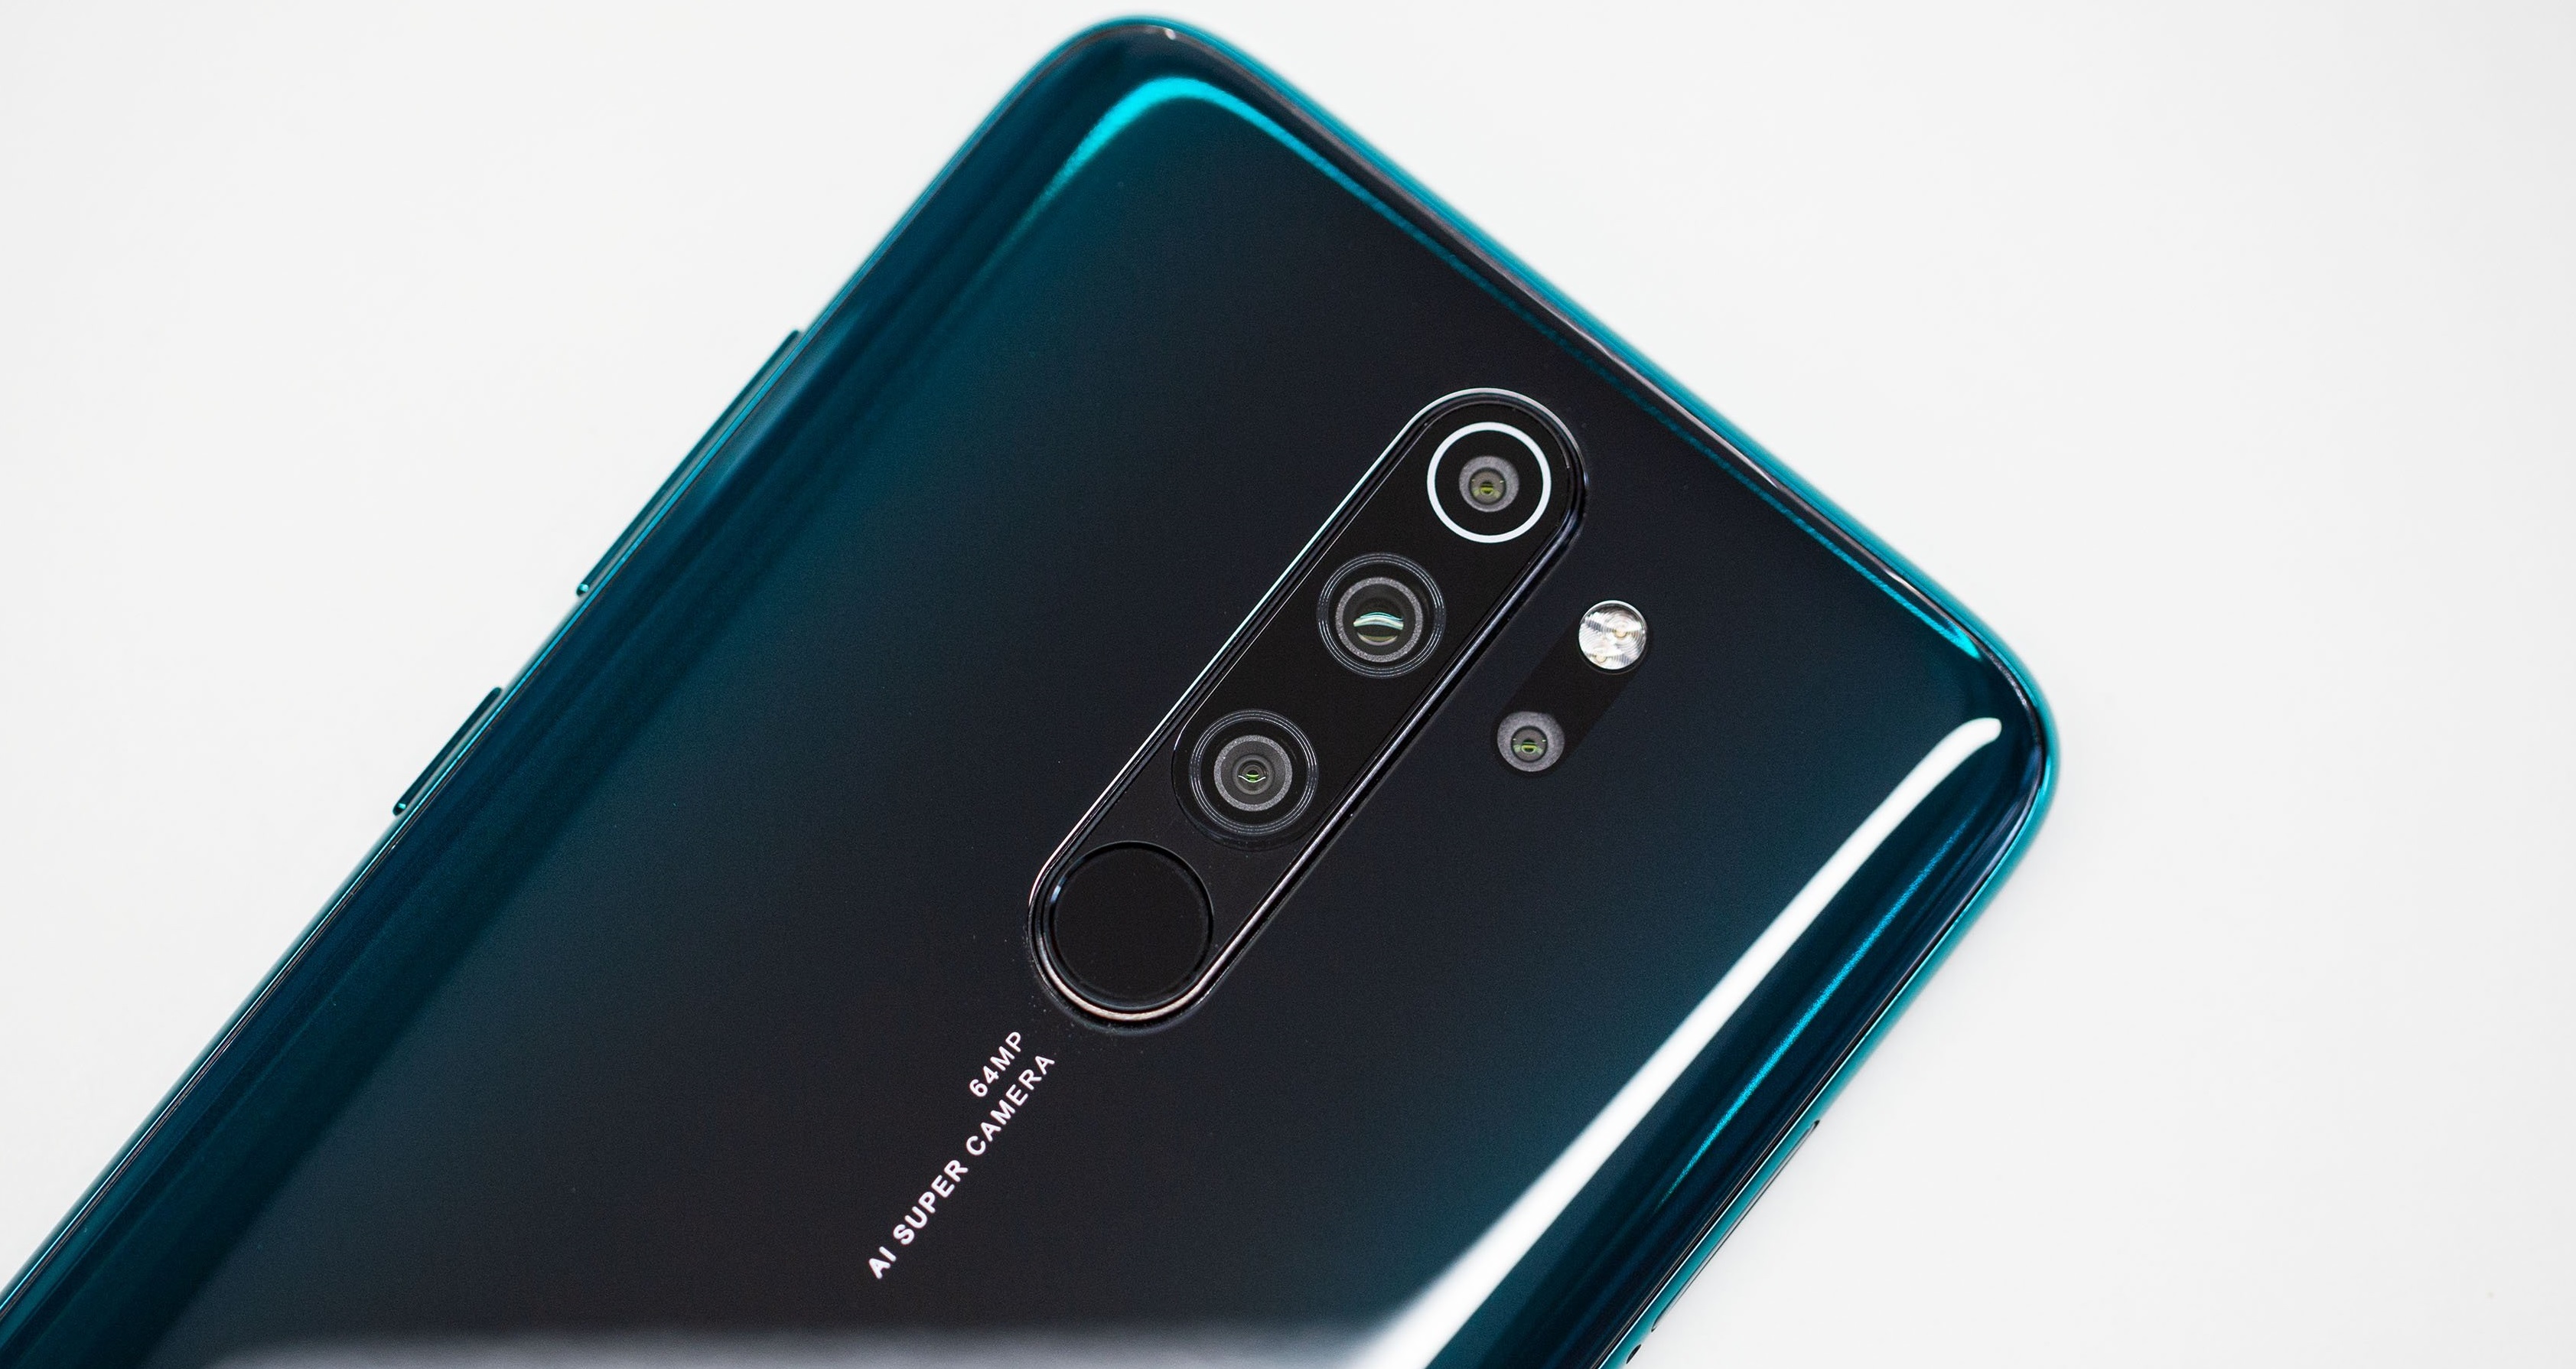 A host of Redmi Note 8 Pro owners remain without Android 10 as latest update supposedly fixes Netflix compatibility issues